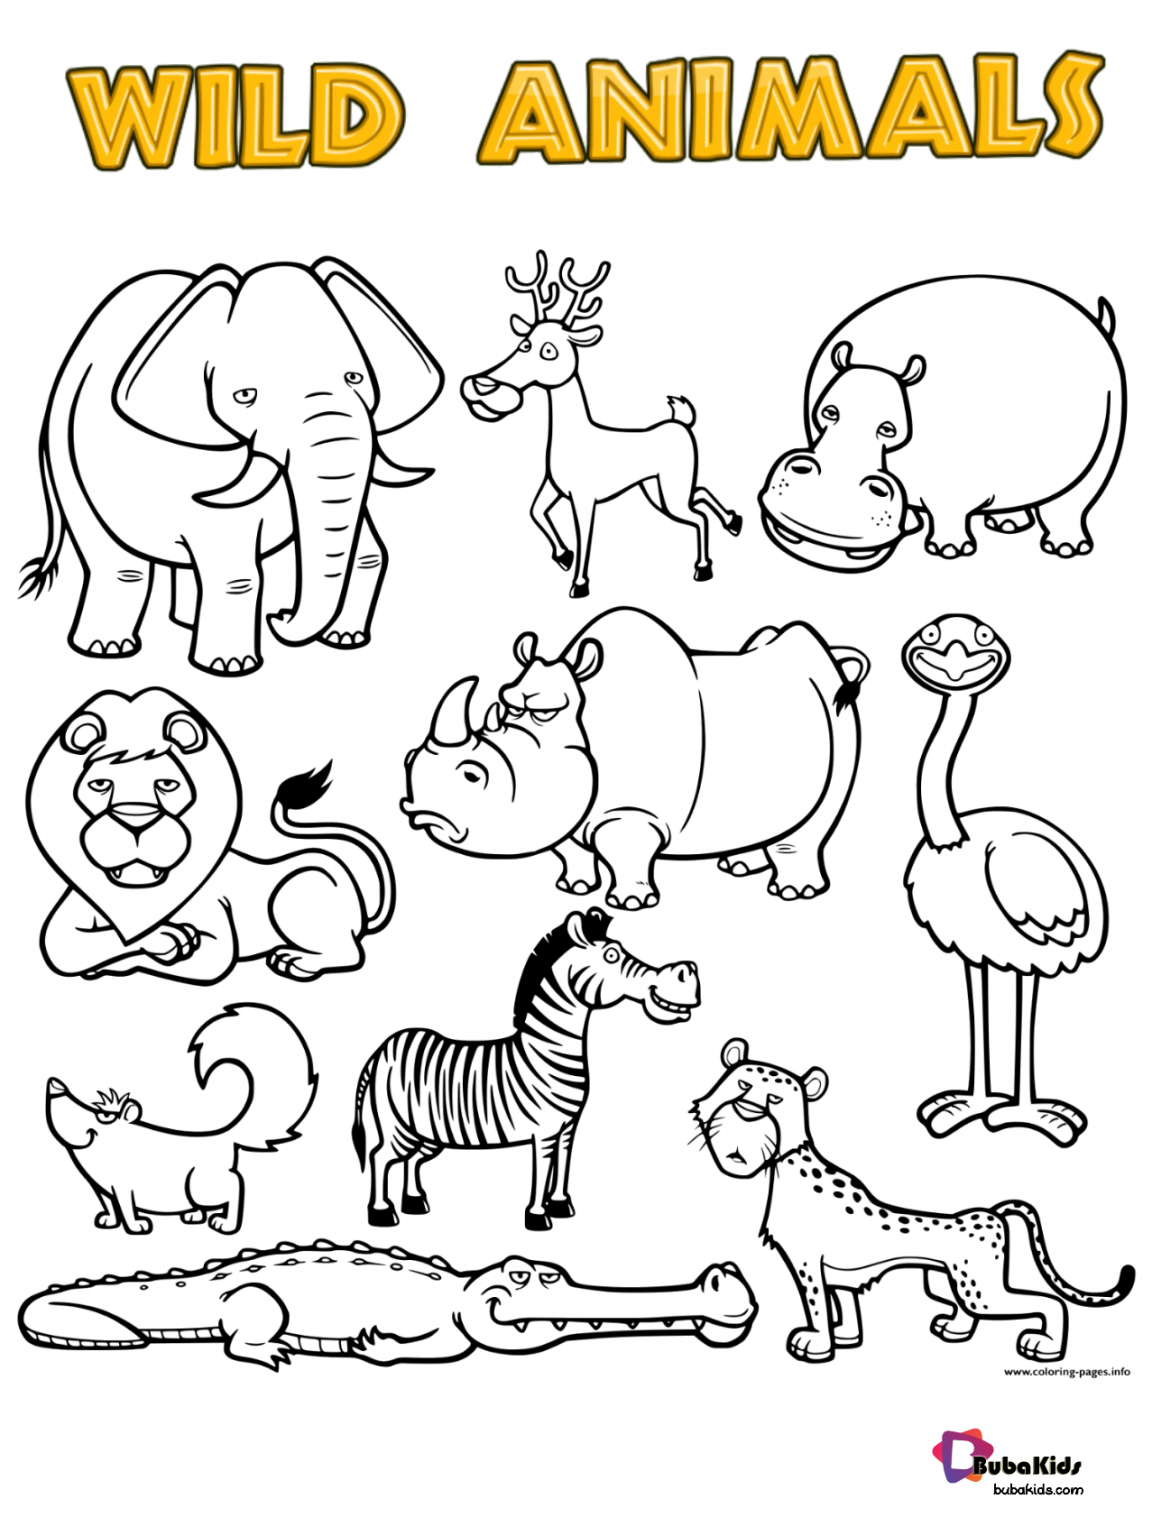 Free download Wild Animals printable coloring page | BubaKids.com